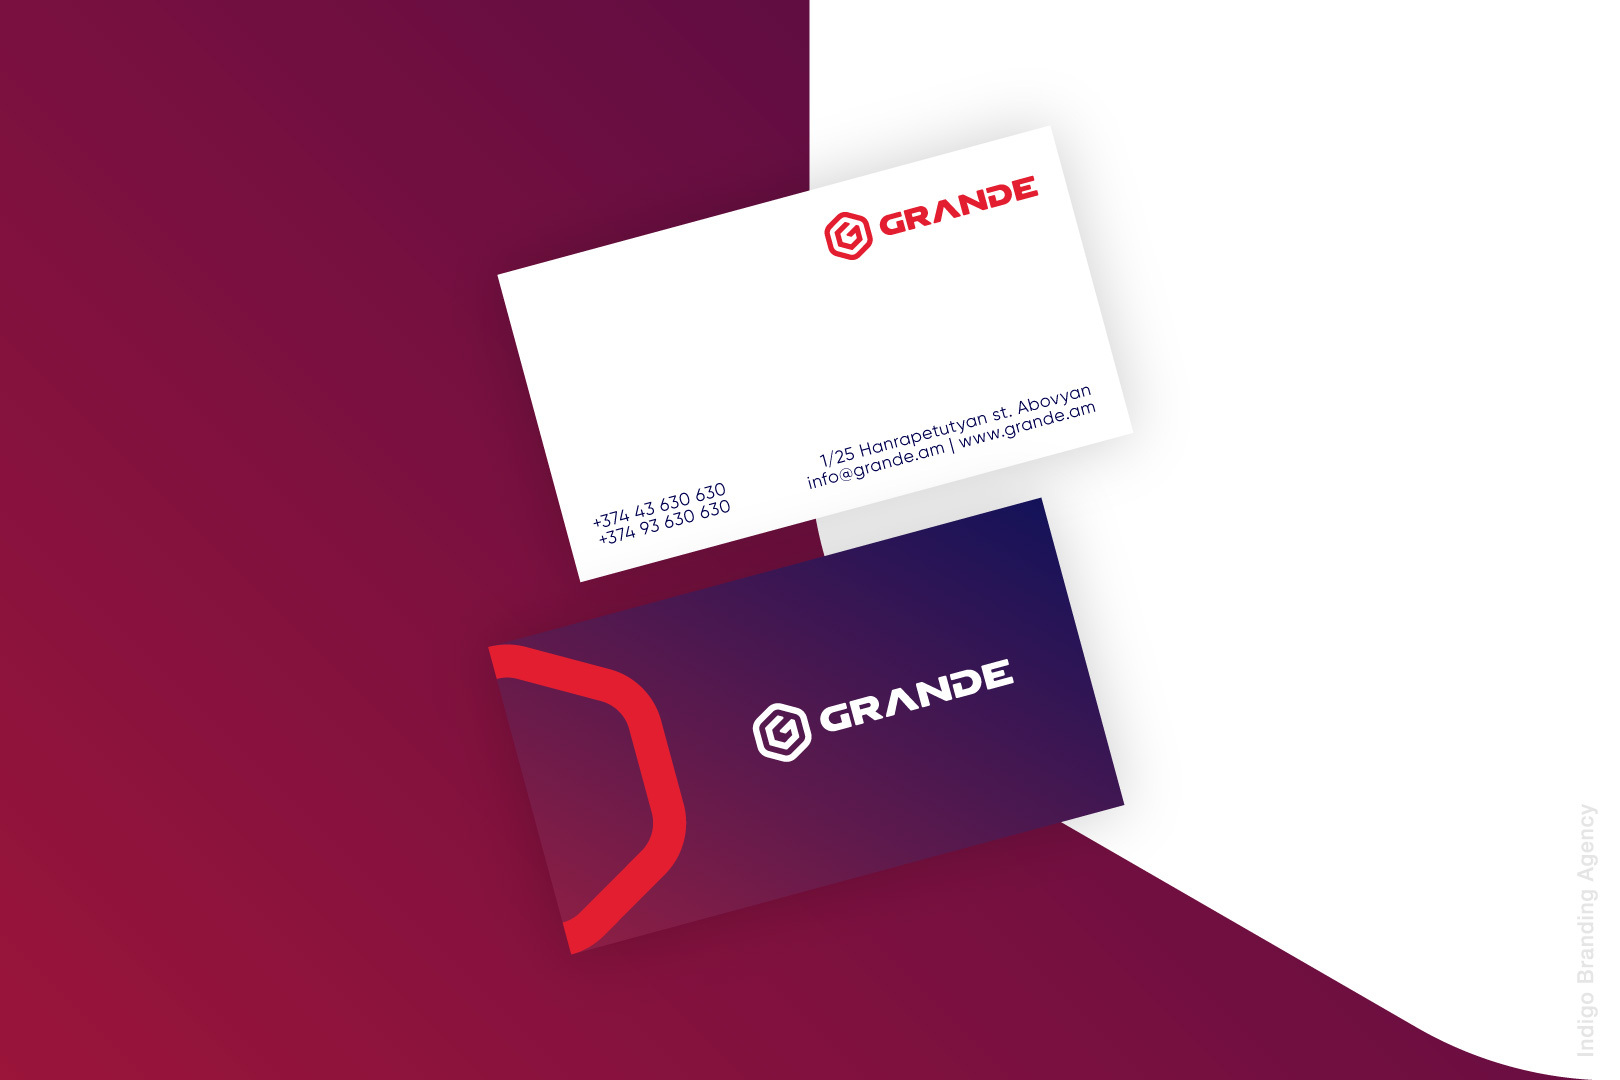 Grande electronics store visit cards with gradient, branding and logo design done by indigo branding and interior design by futuris architects